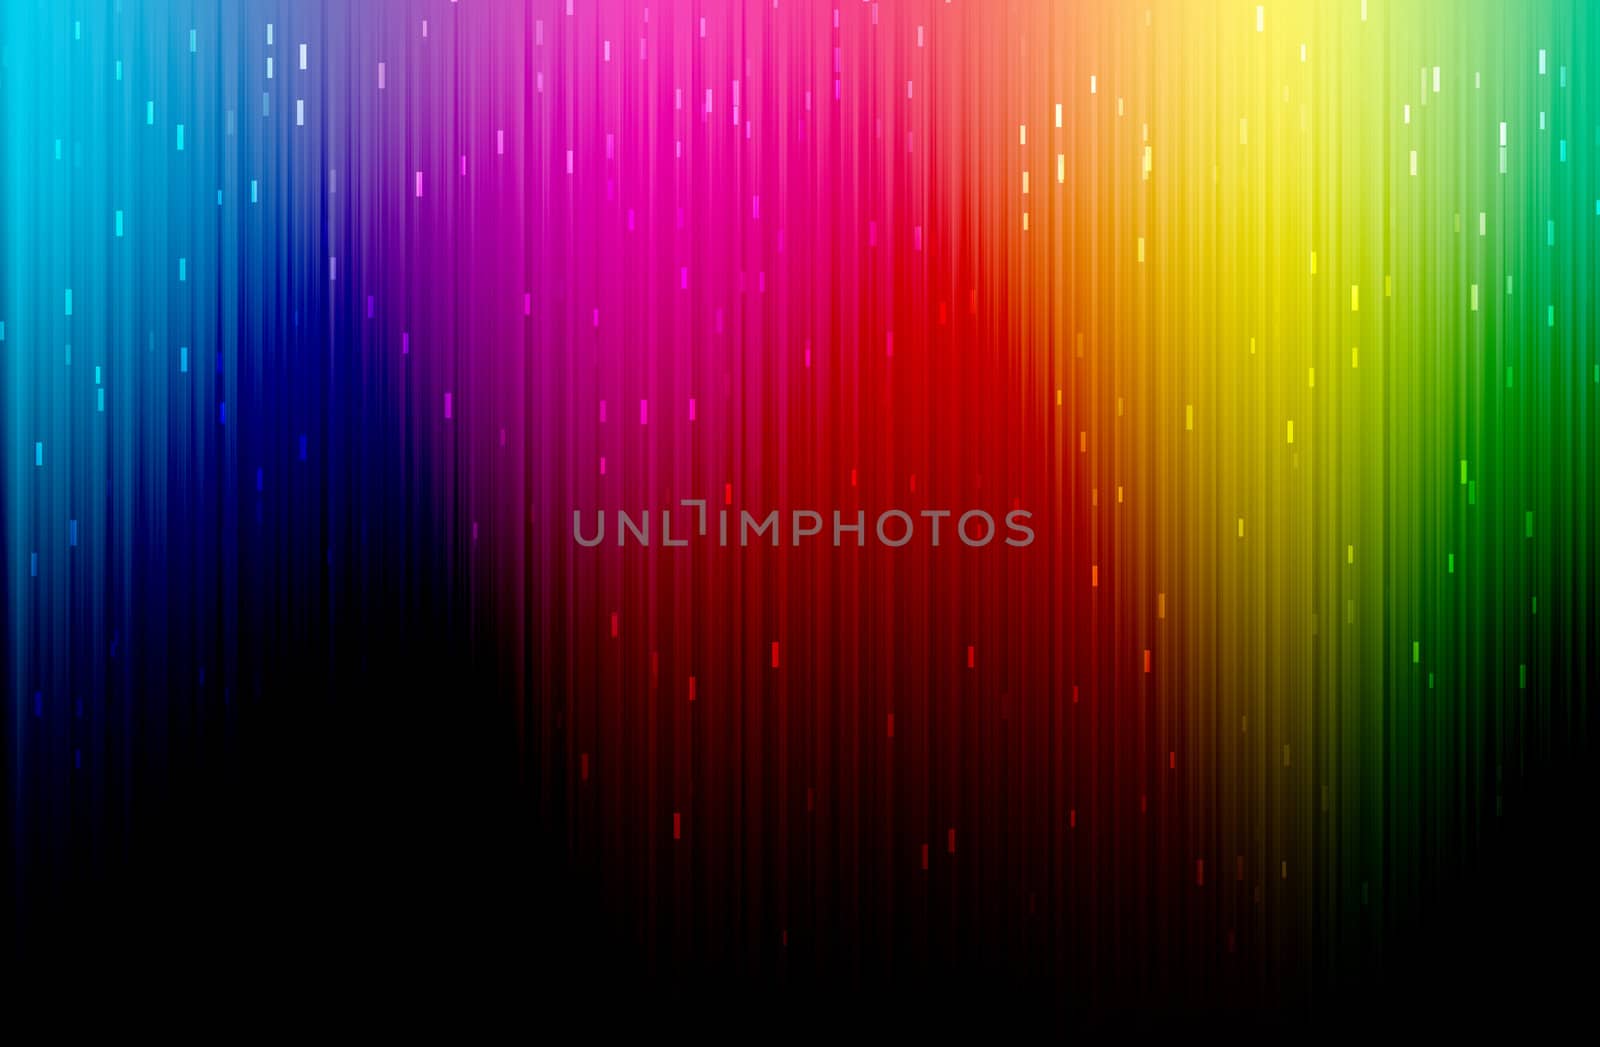 Abstract striped background with